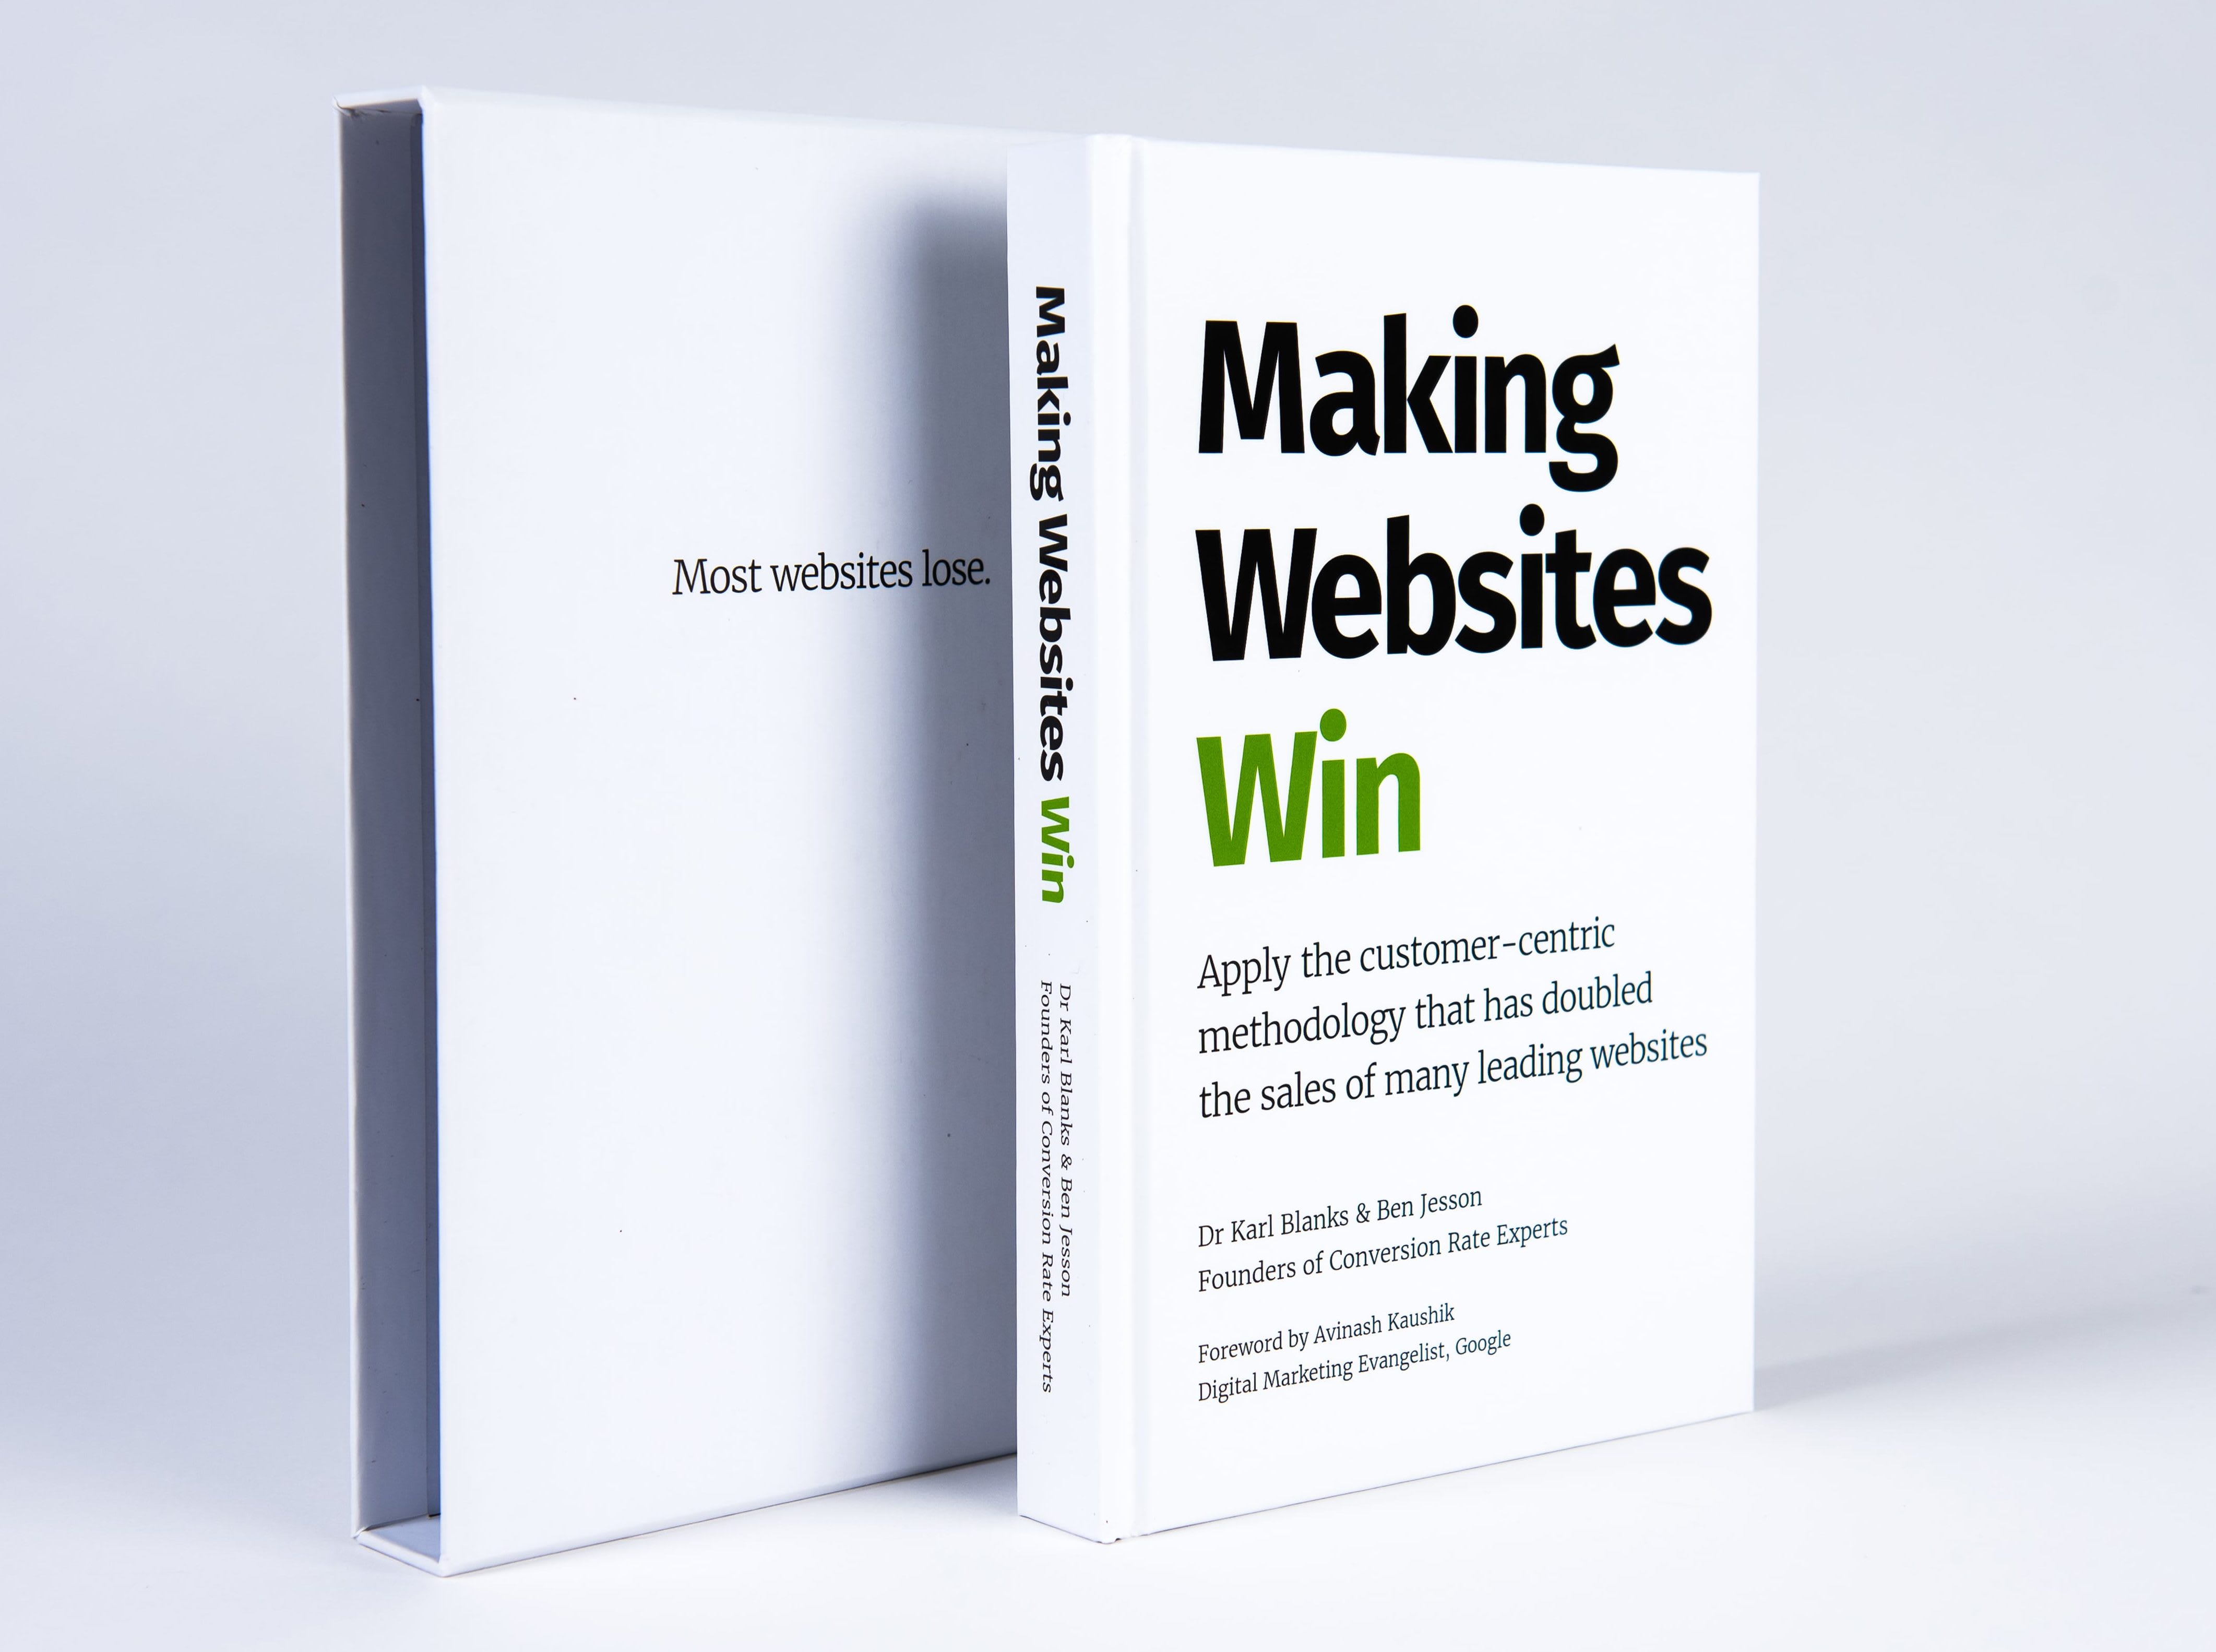 A photo of our book, Making Websites Win